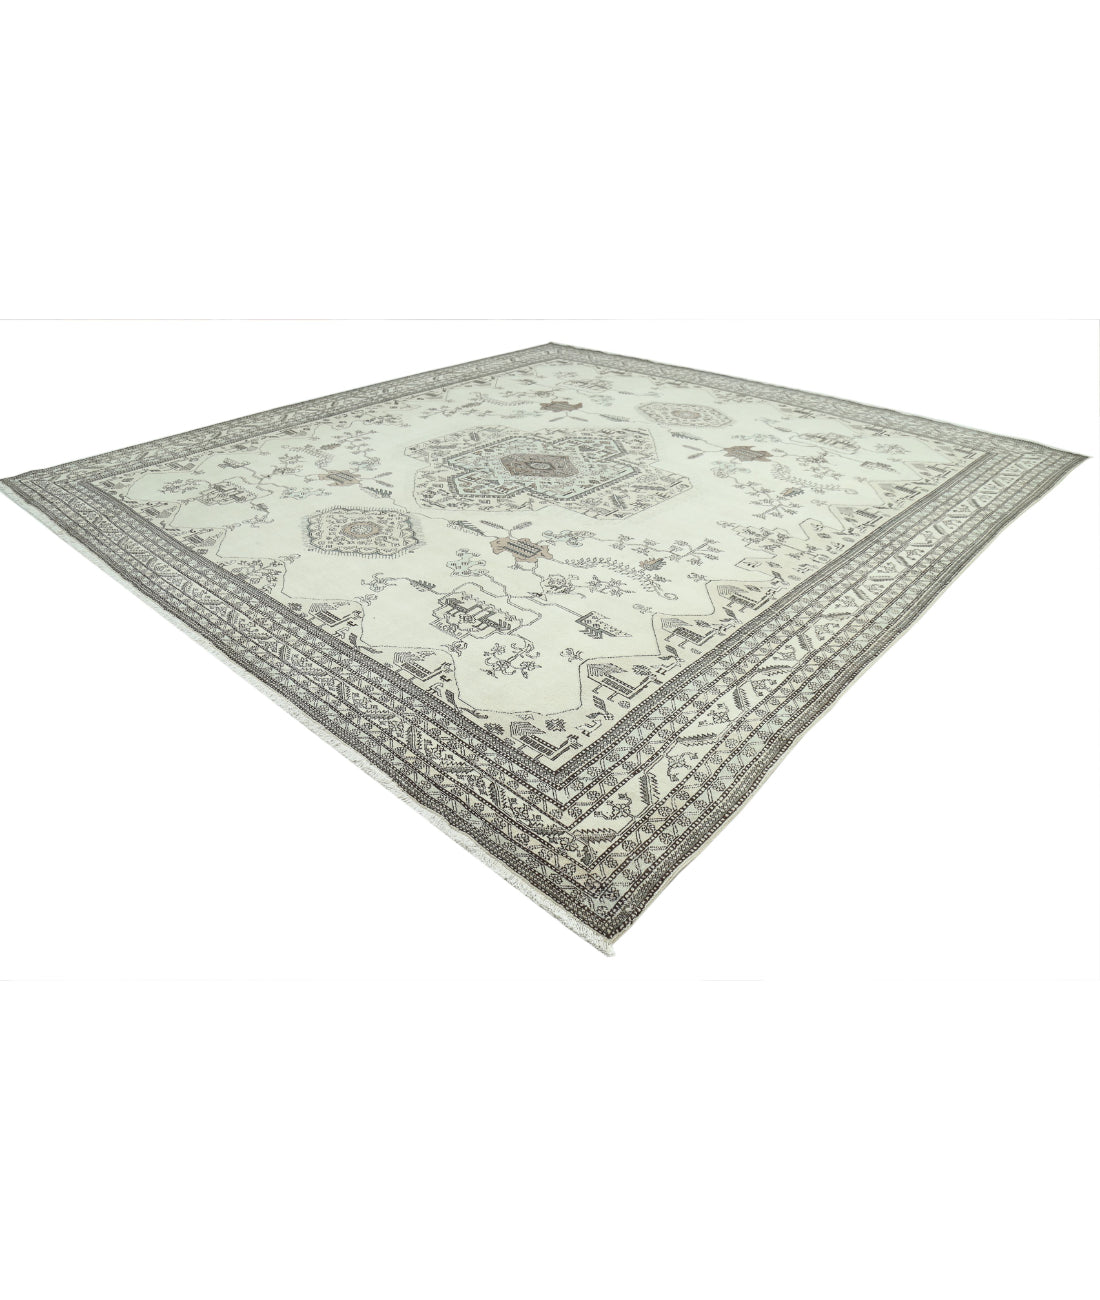 Hand Knotted Vintage Tribal Moroccan Wool Rug - 14'11'' x 16'1'' 14'11'' x 16'1'' (448 X 483) / Ivory / Grey